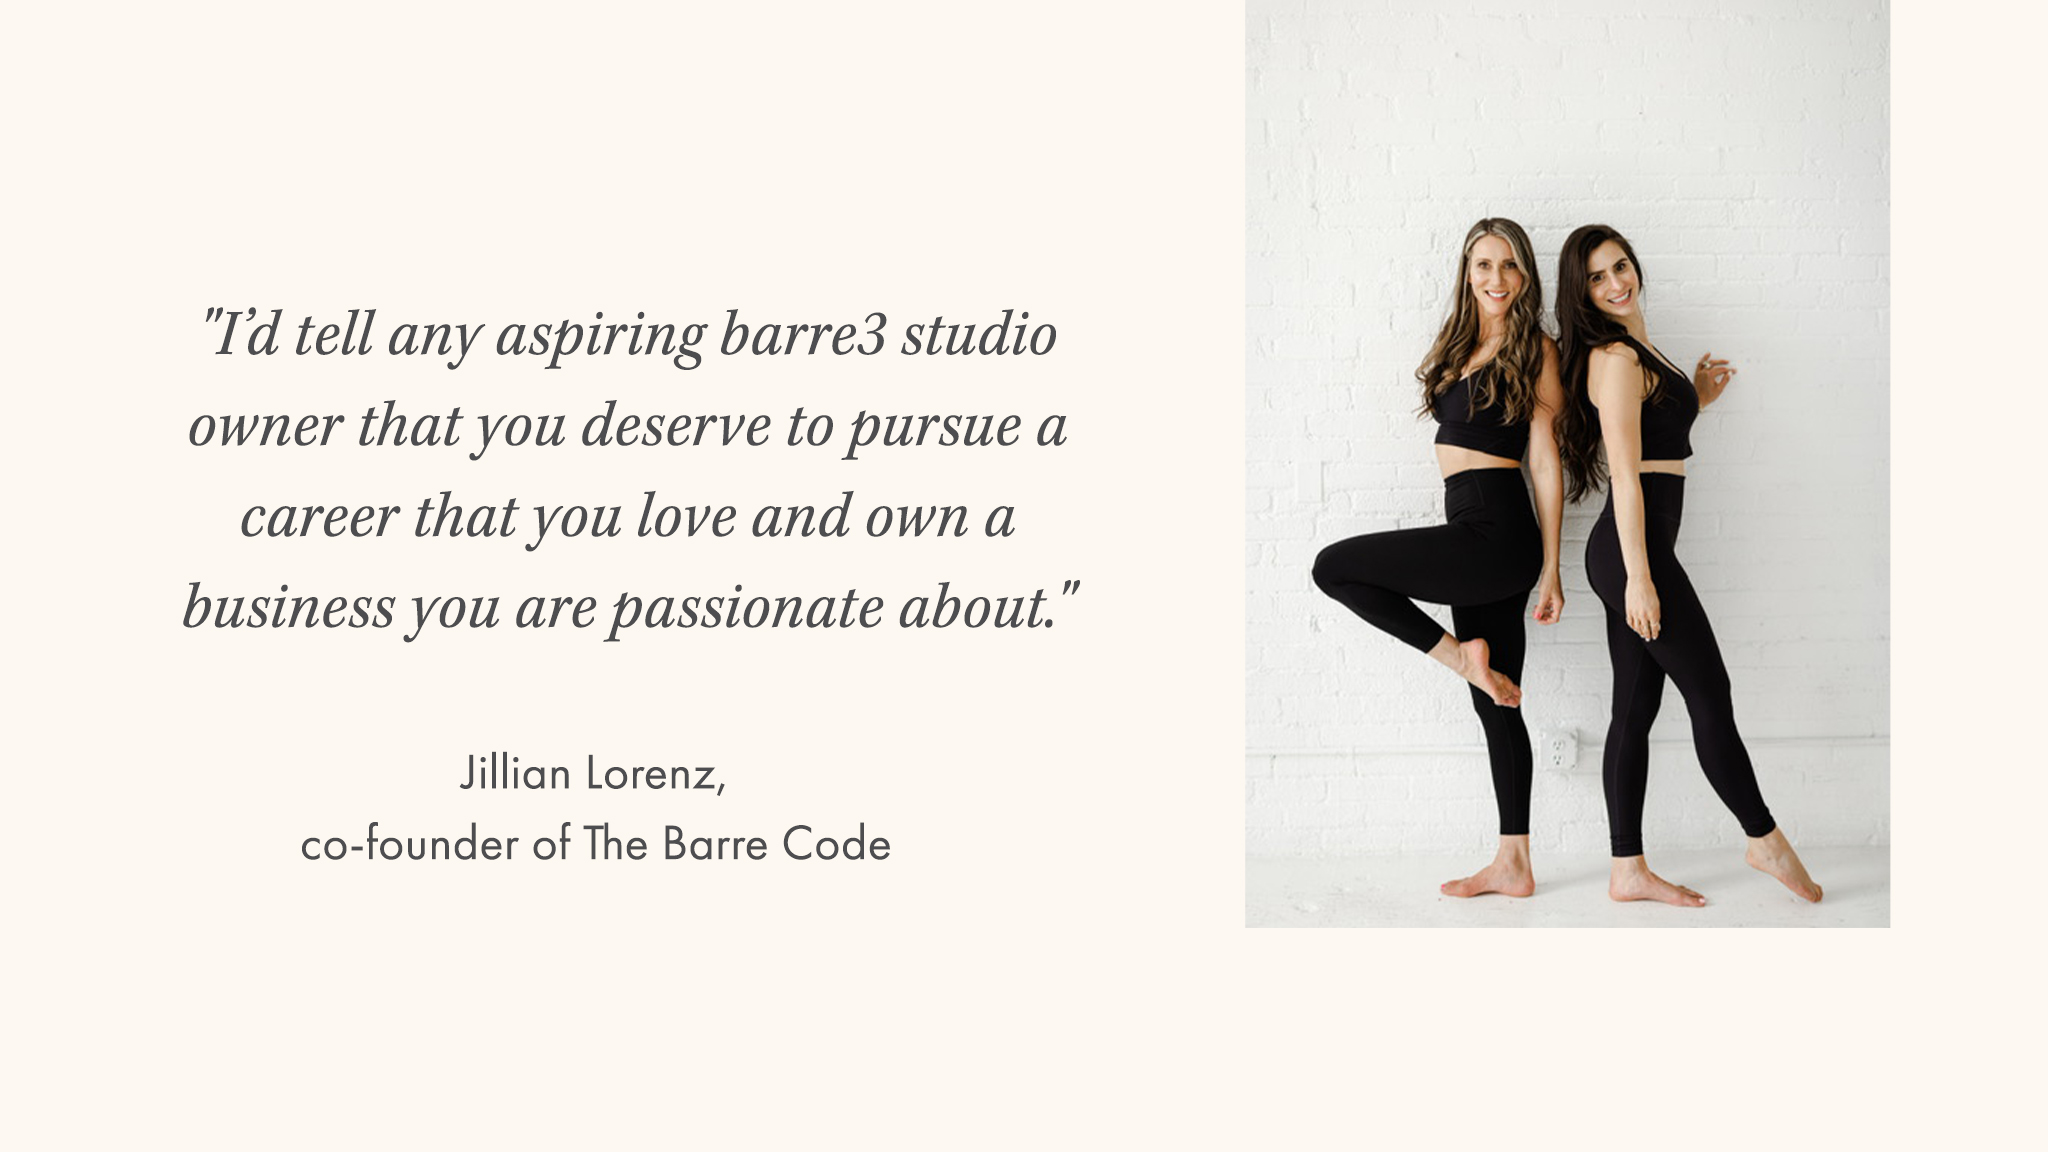 BECOMING BARRE3: A JOURNEY OF EMPOWERMENT AND GROWTH